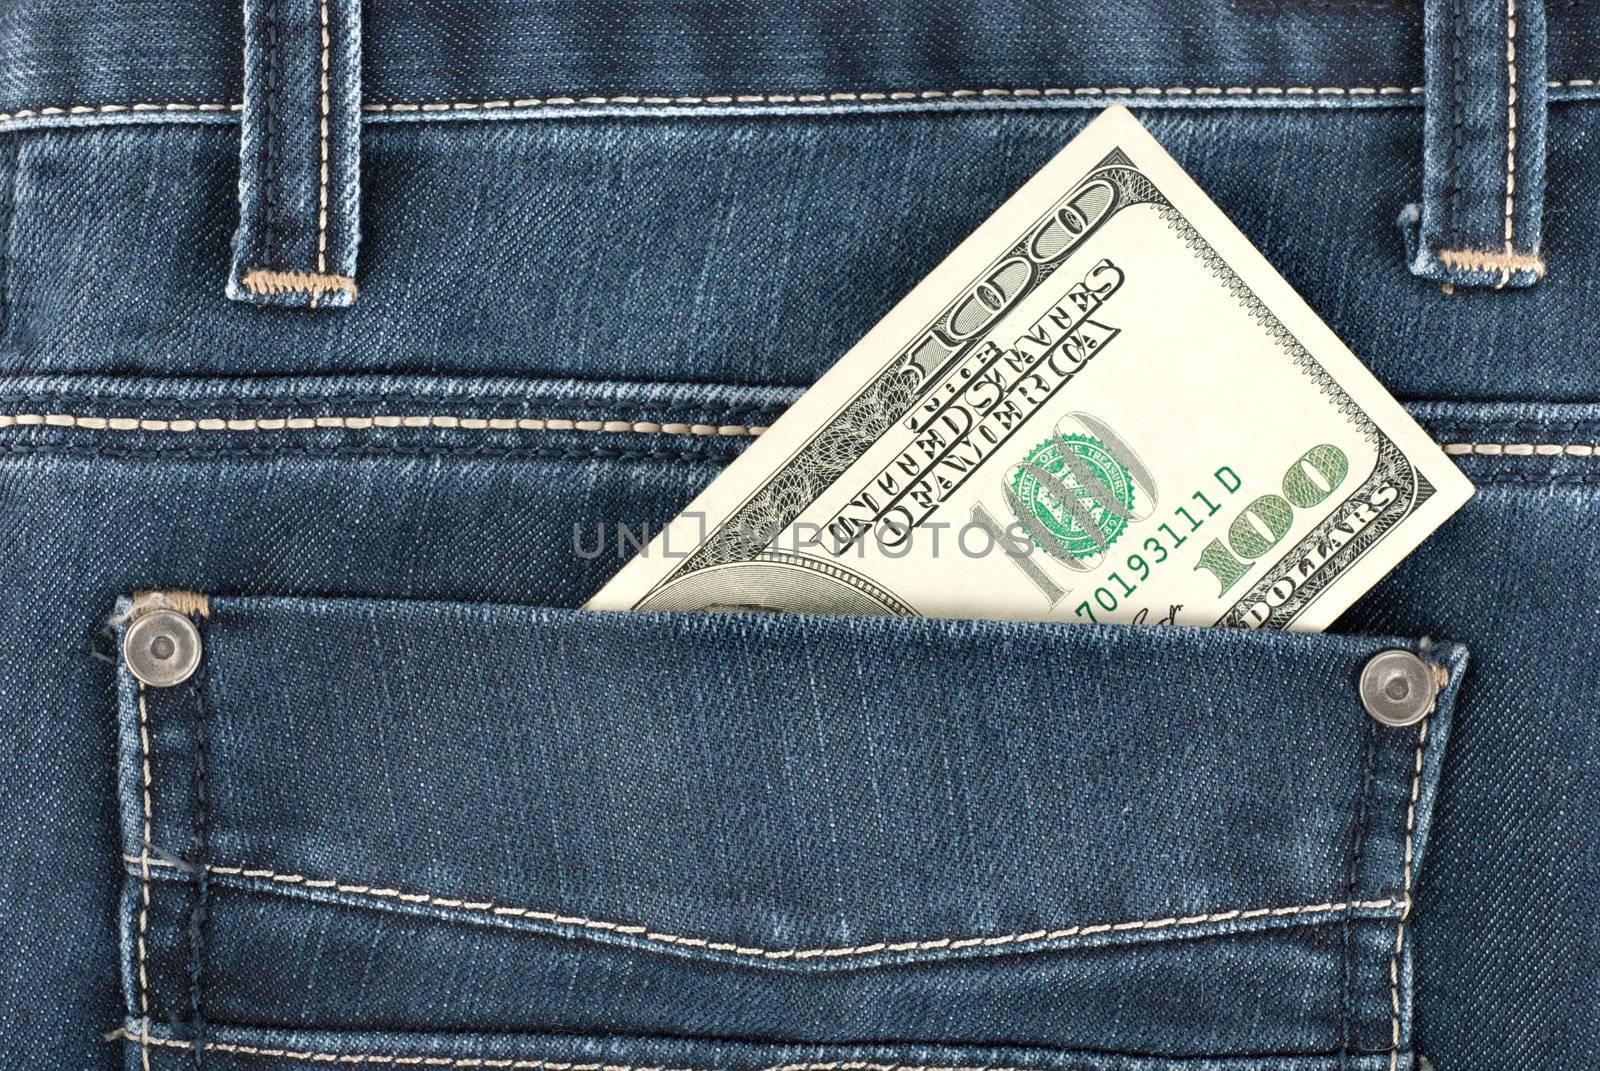 A one hundred dollar note in the back pocket of denim trousers